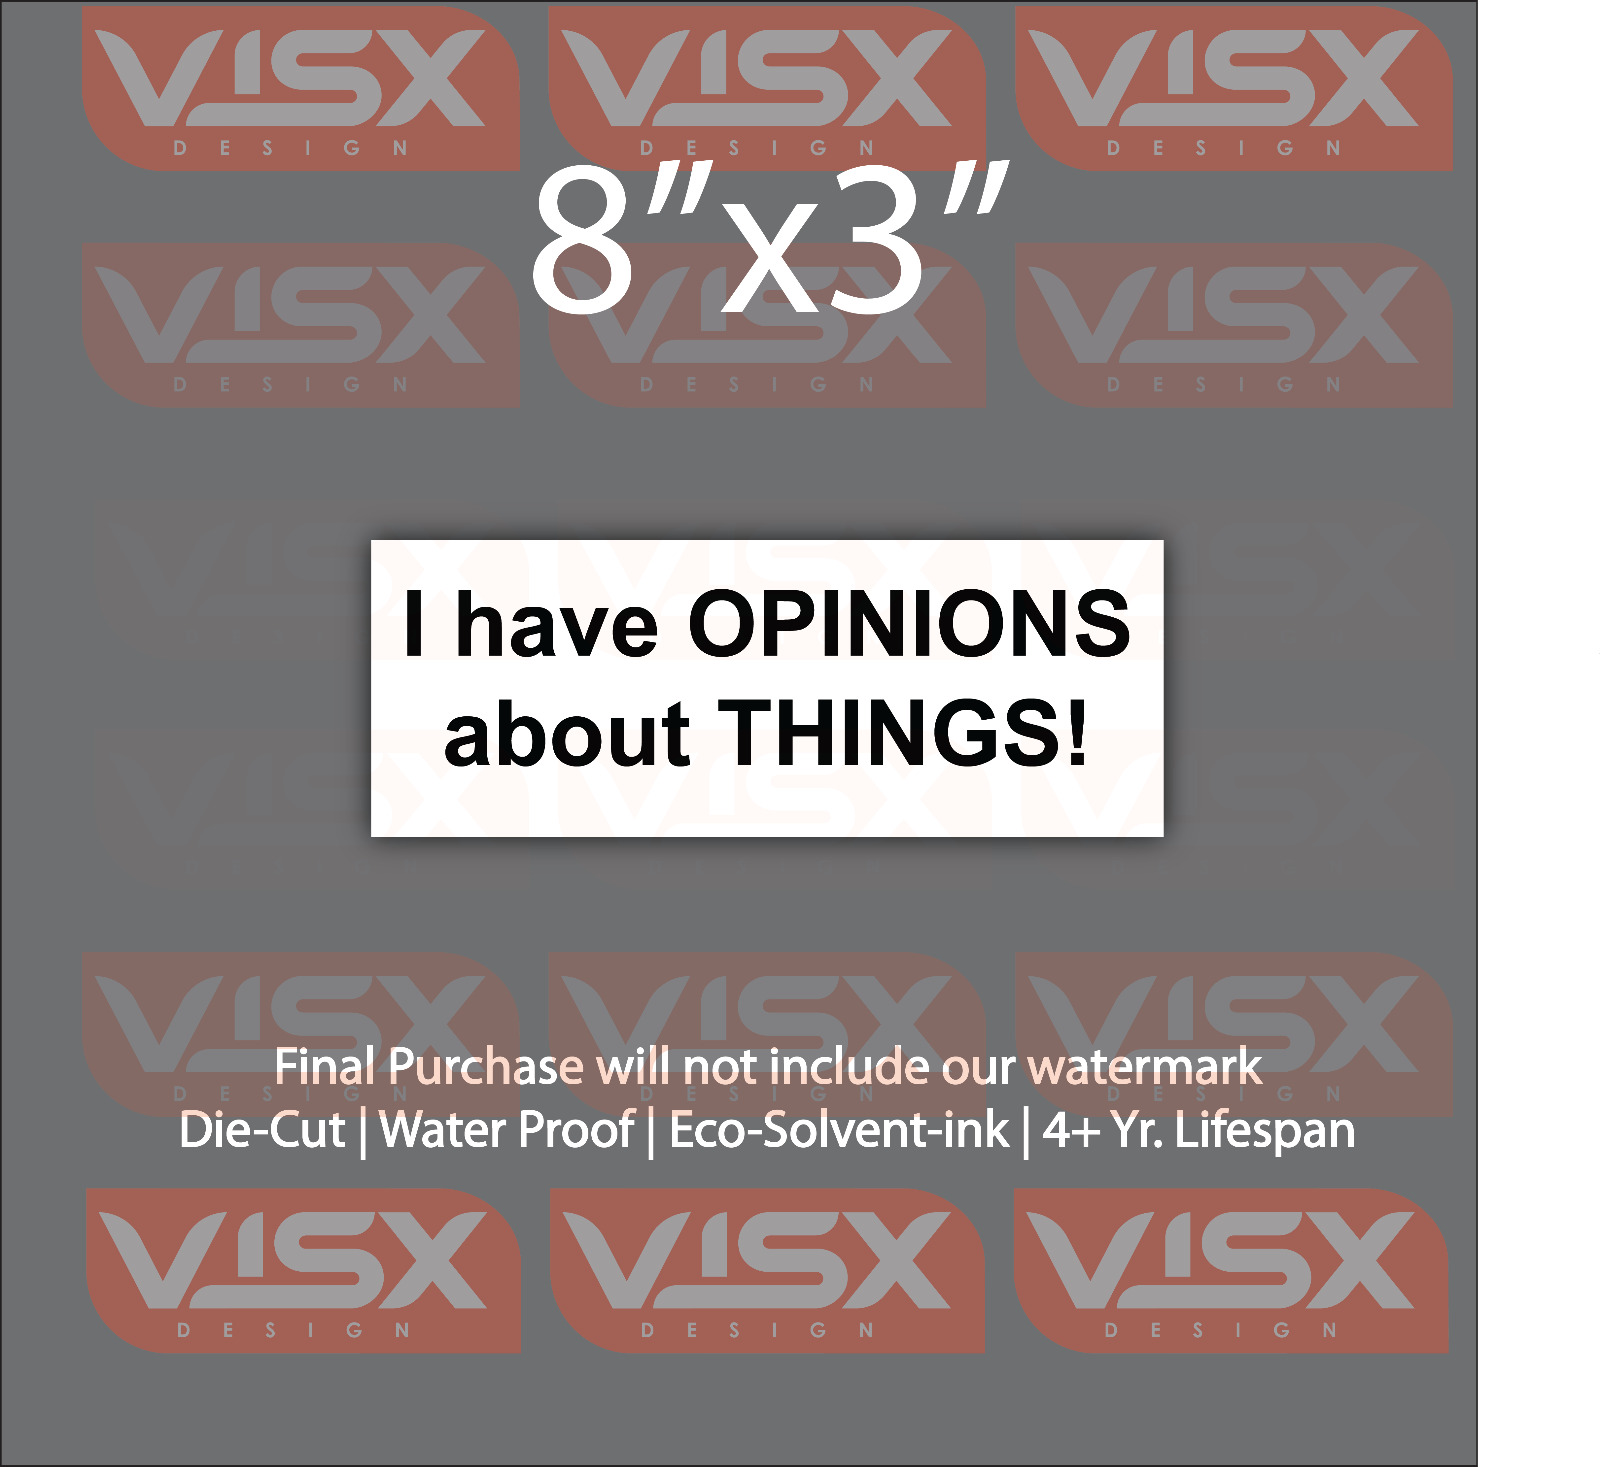 I have opinions about things Bumper Sticker Funny tailgate joke prank meme old